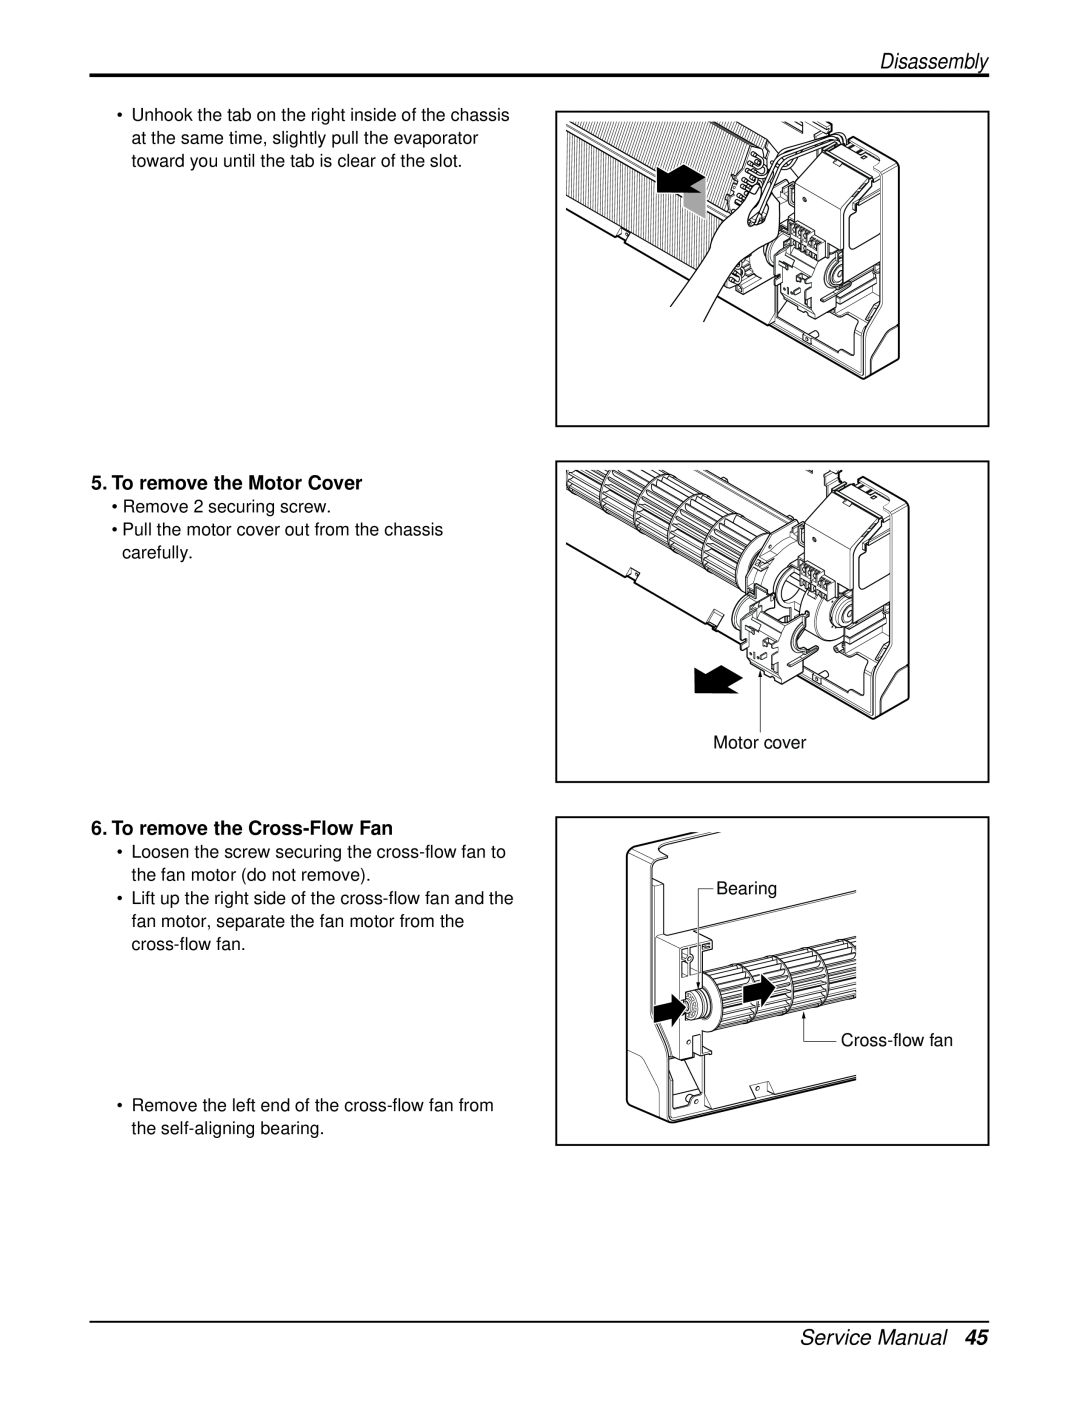 Heat Controller DMH18DB-1 manual Service Manual, To remove the Motor Cover, To remove the Cross-FlowFan, Disassembly 